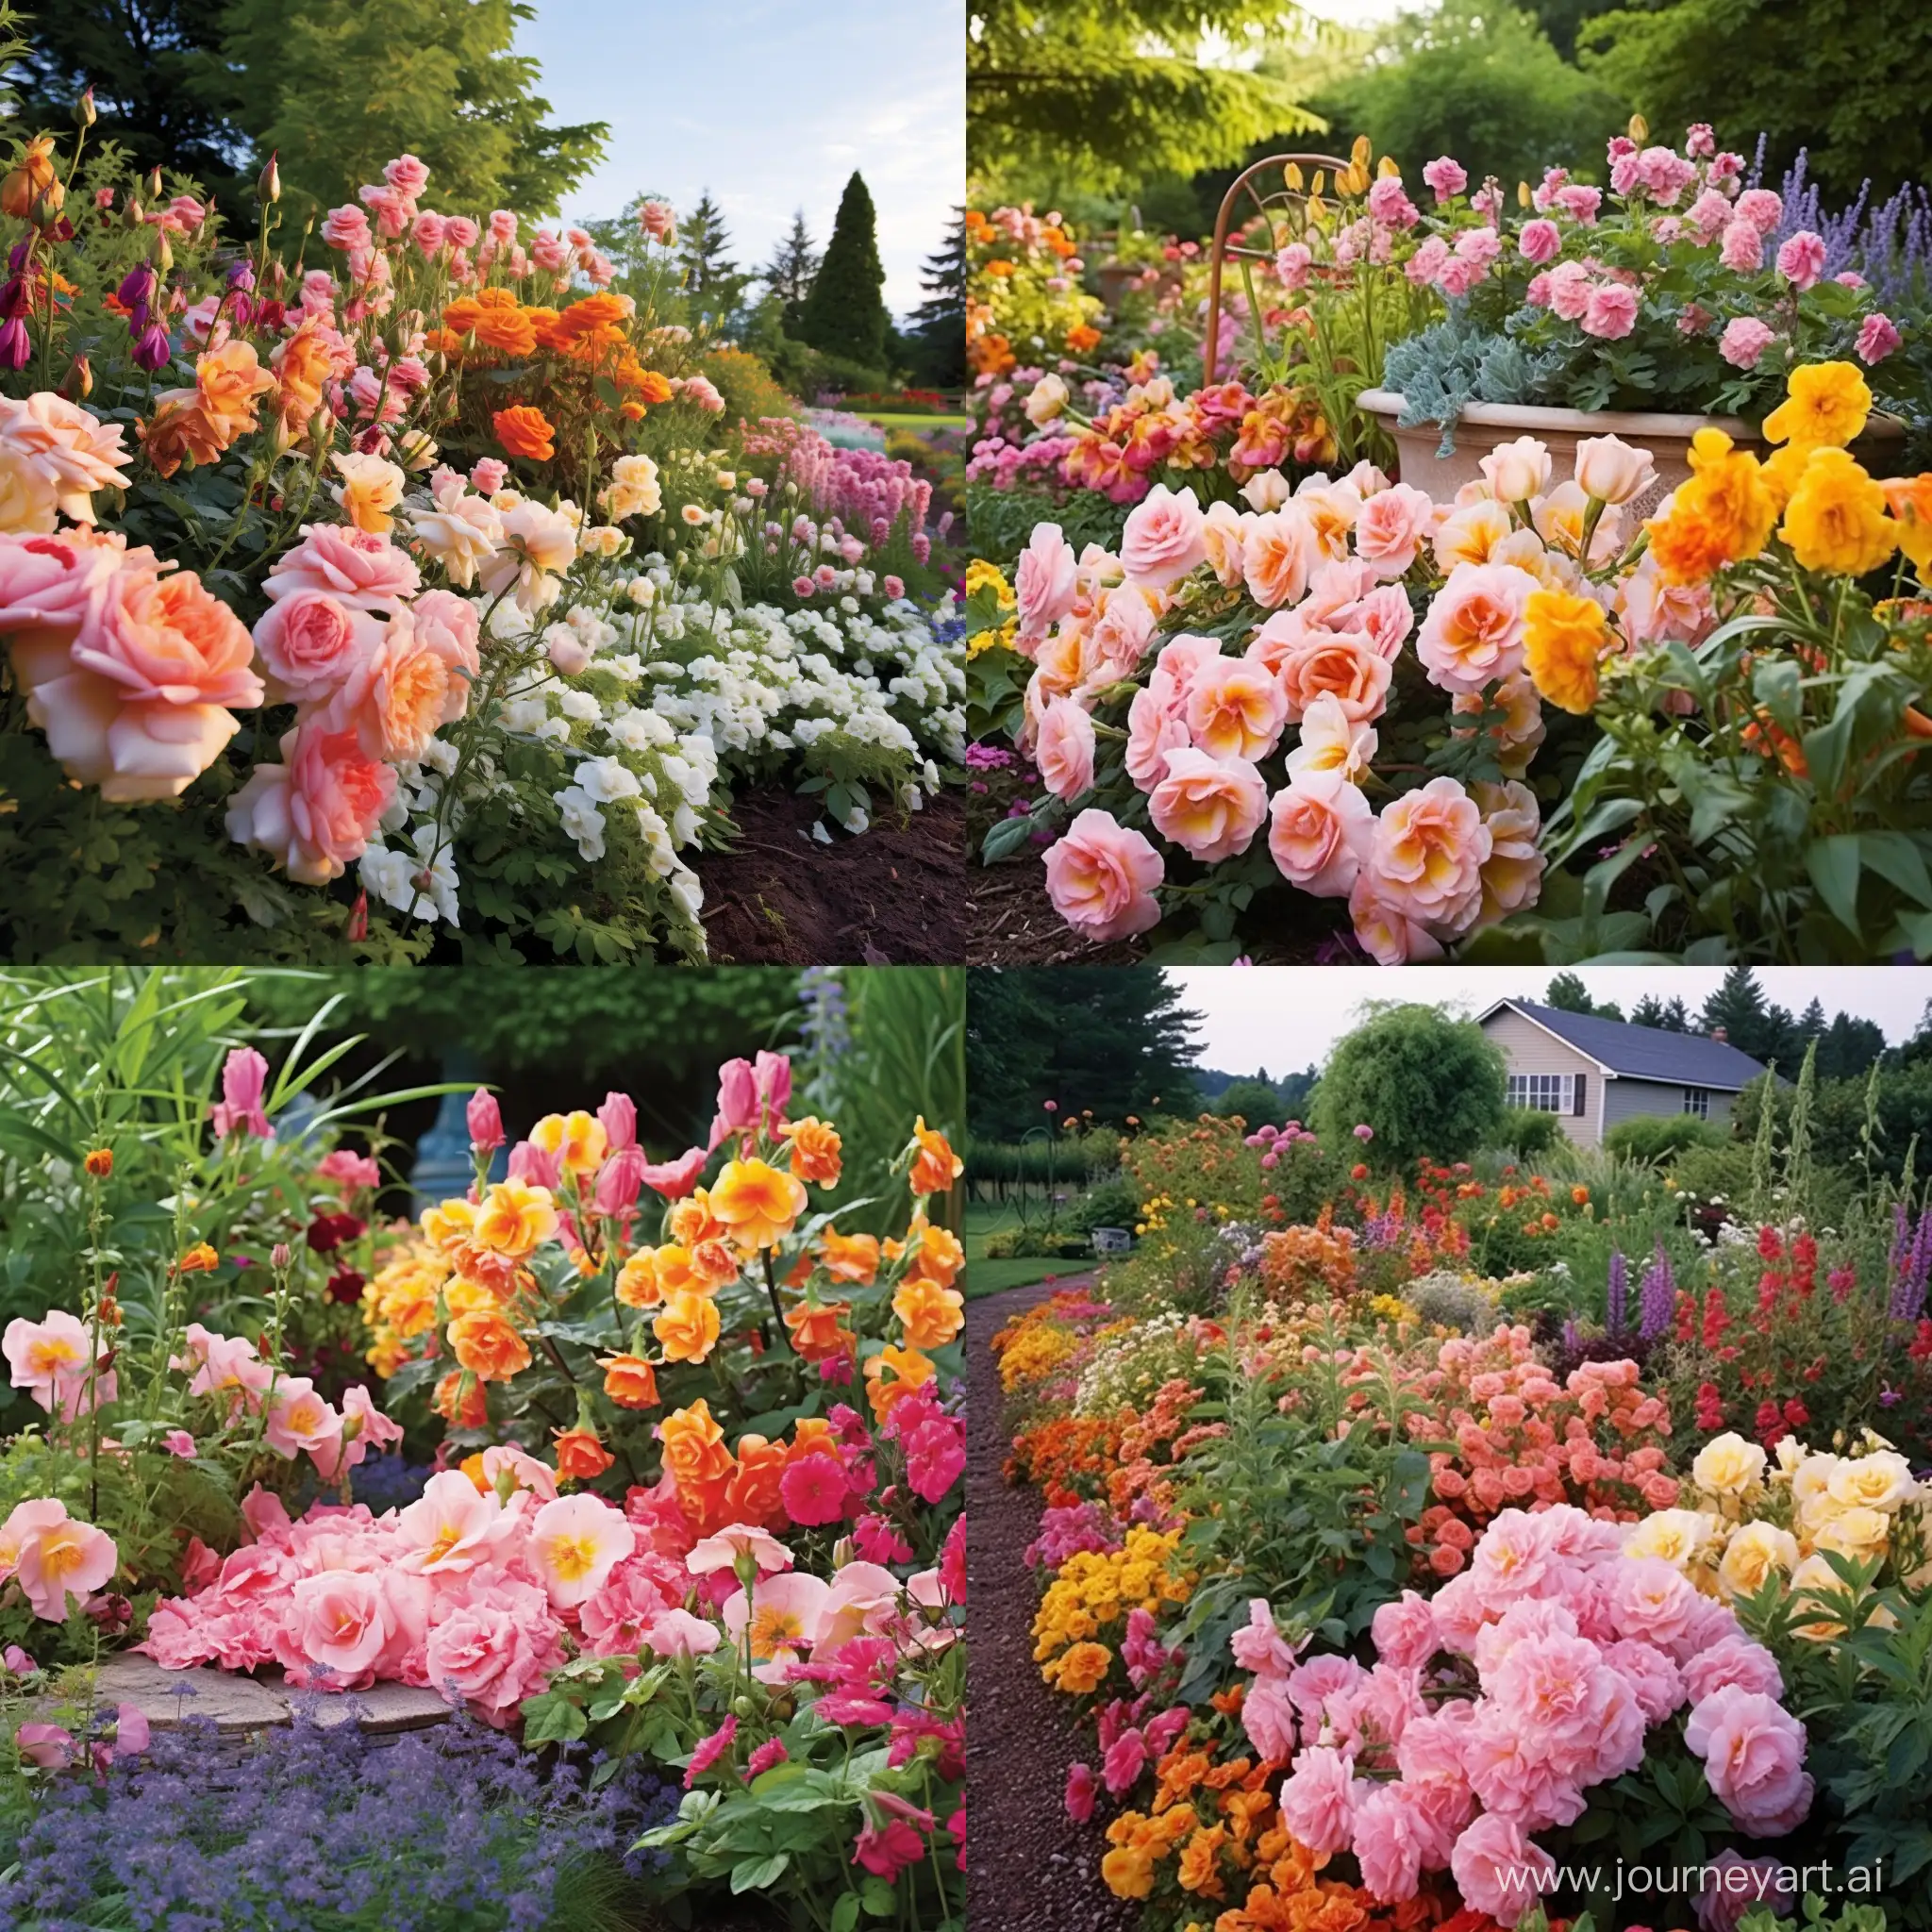 Lush-Garden-Blooming-with-Peaches-and-Dreams-Hollyhock-Roses-Dicentra-Magnifica-and-More